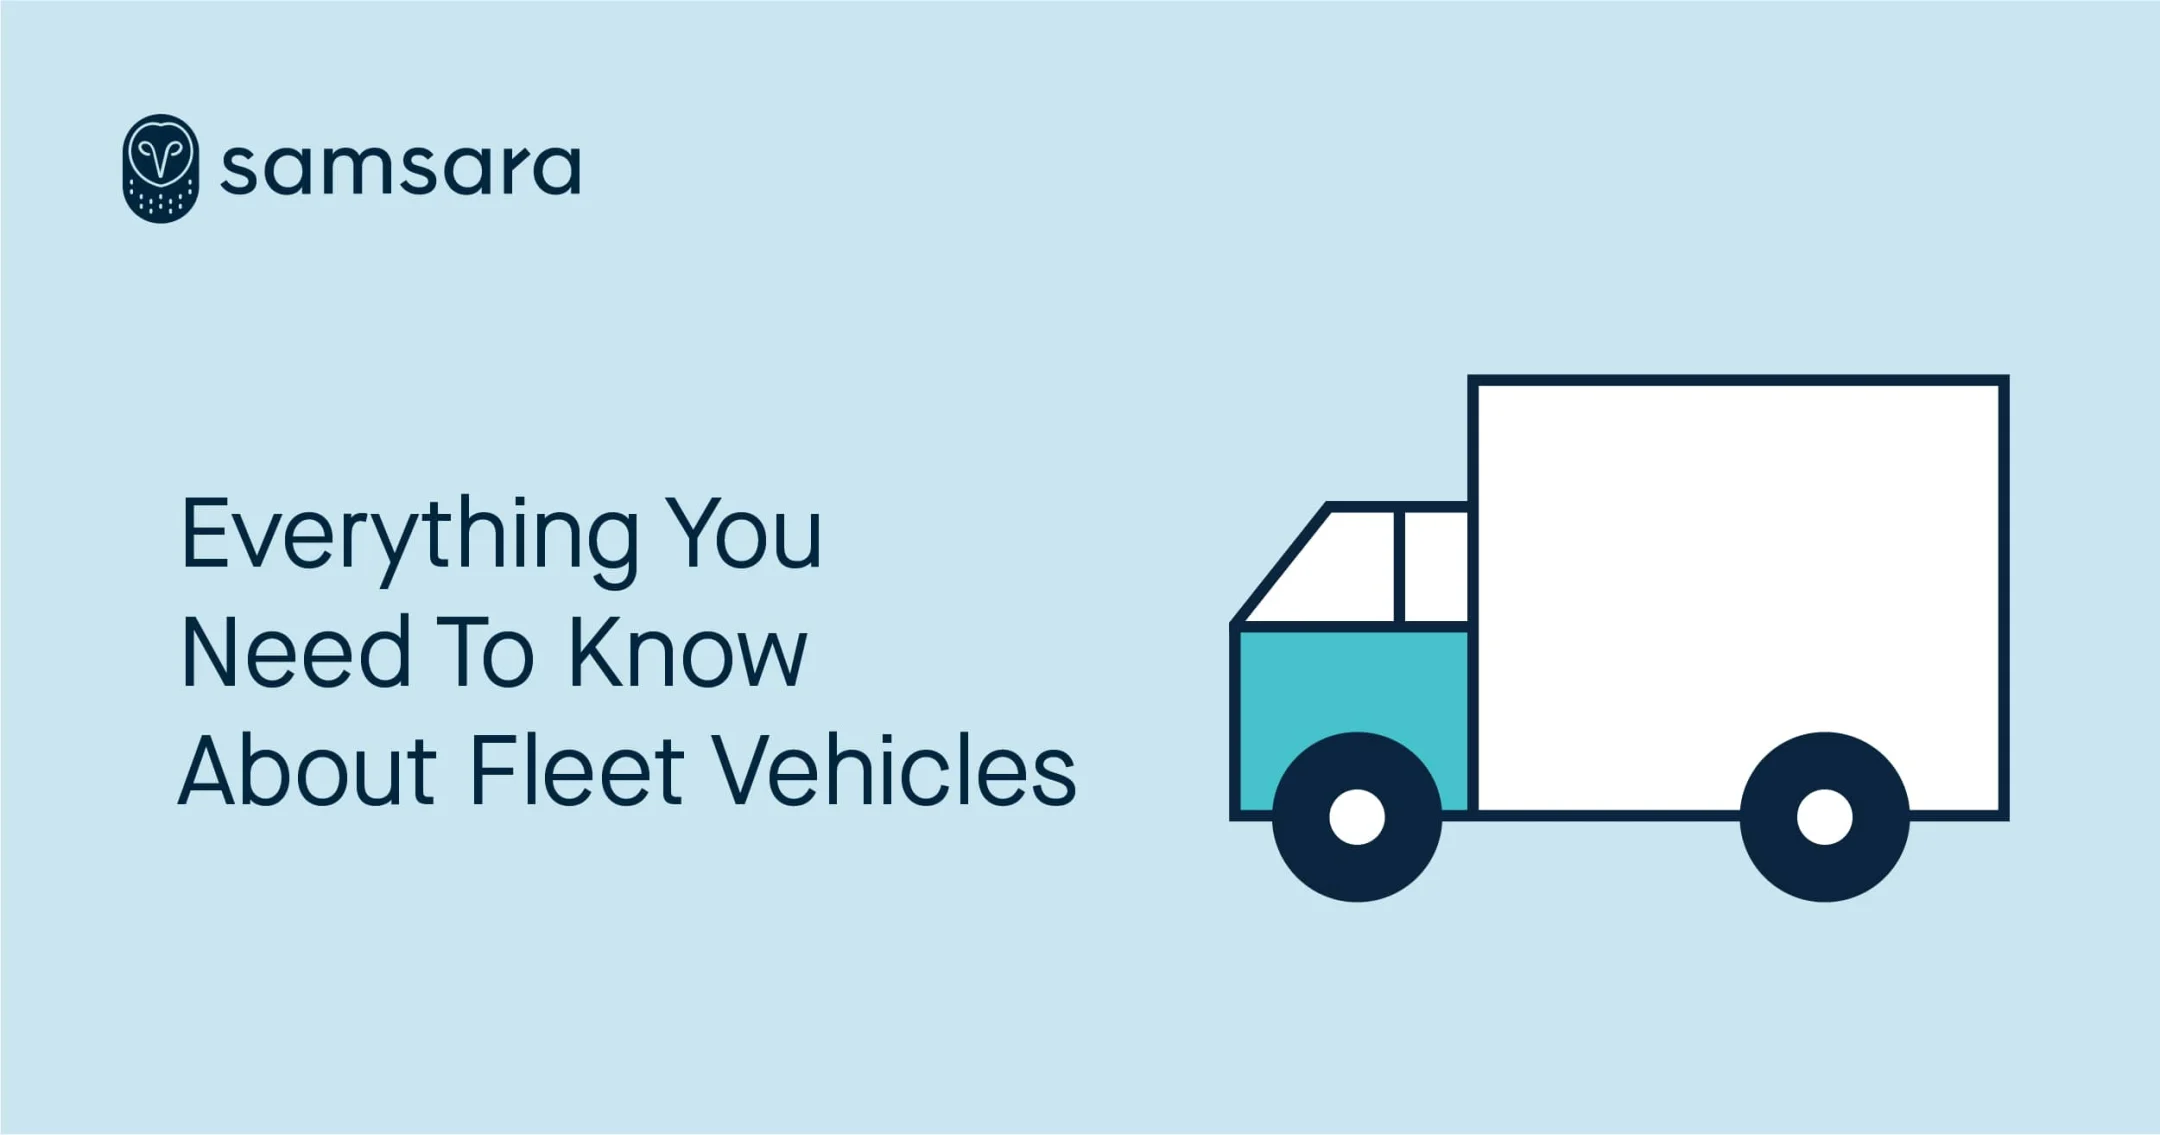 Everything You Need to Know About Fleet Vehicles